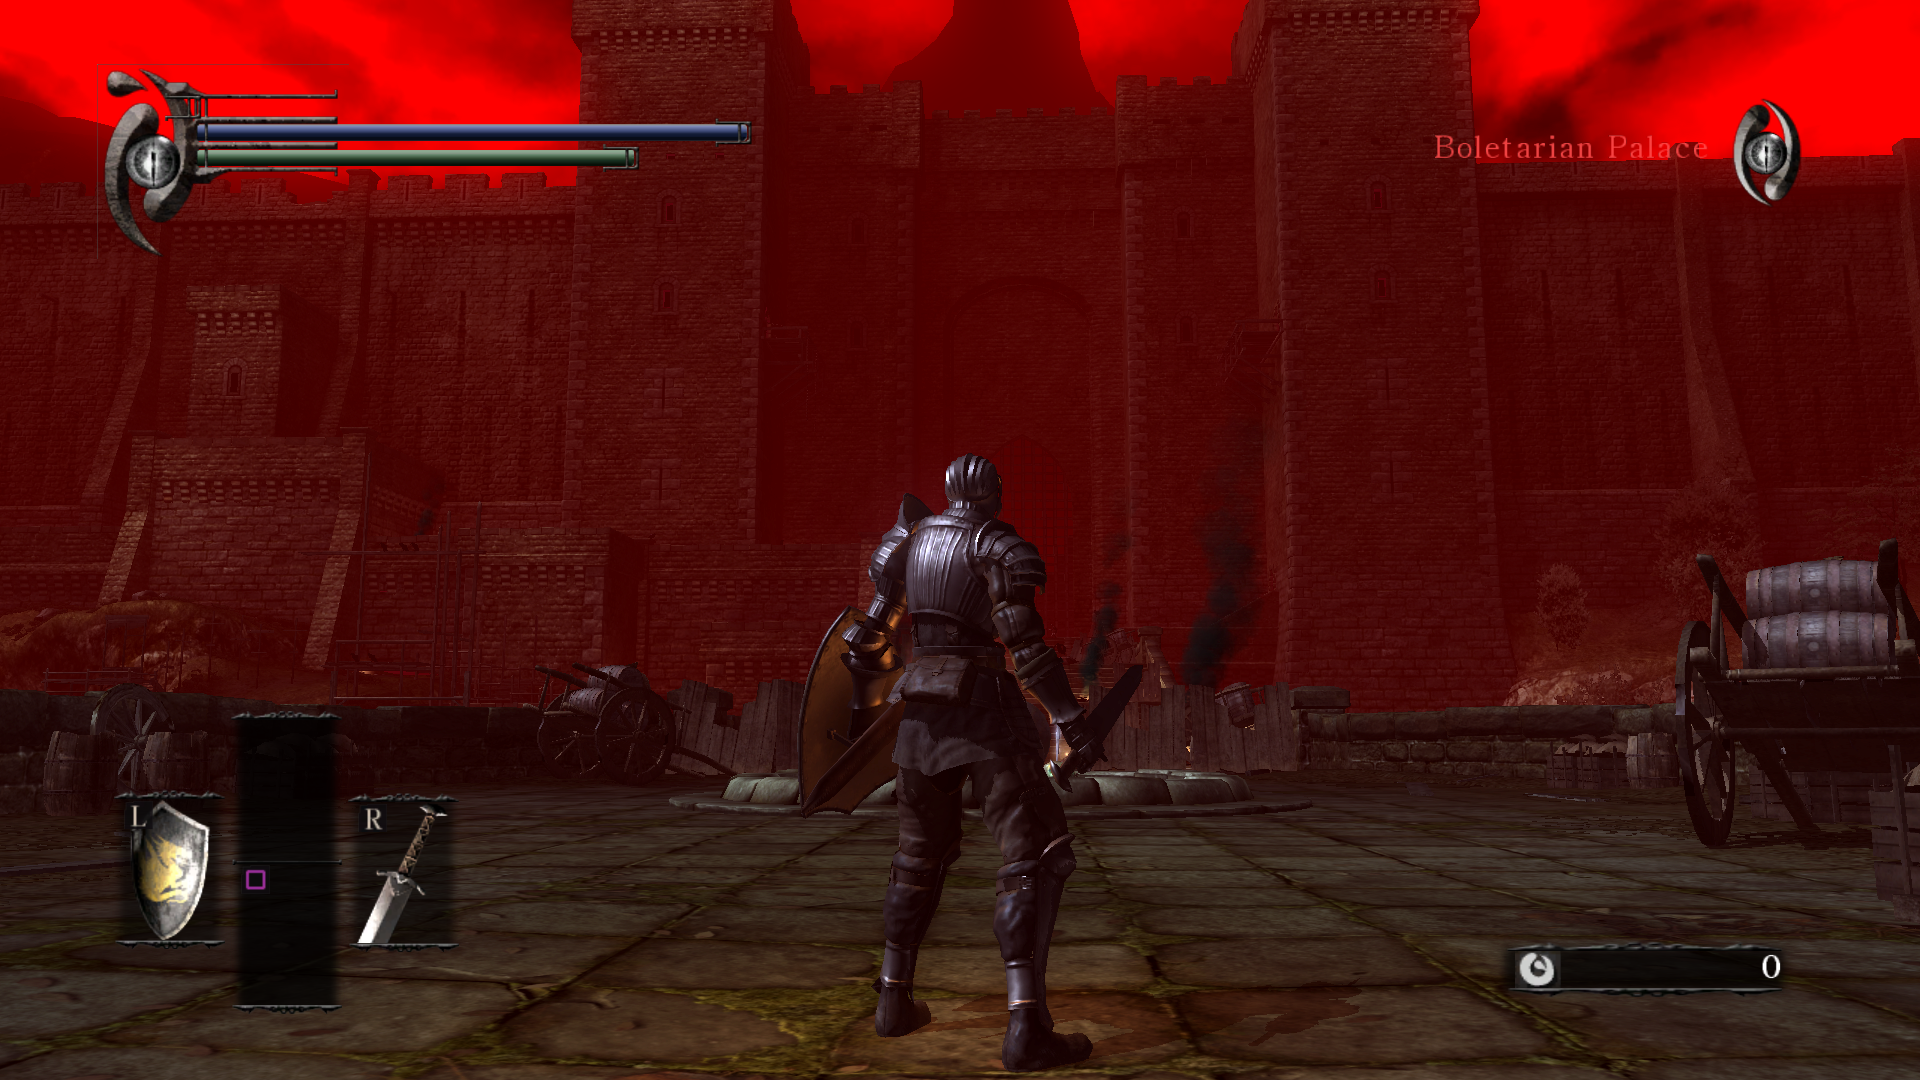 Demon's Souls Nightmare Of Boletaria Mod Makes The Game Even More Challenging